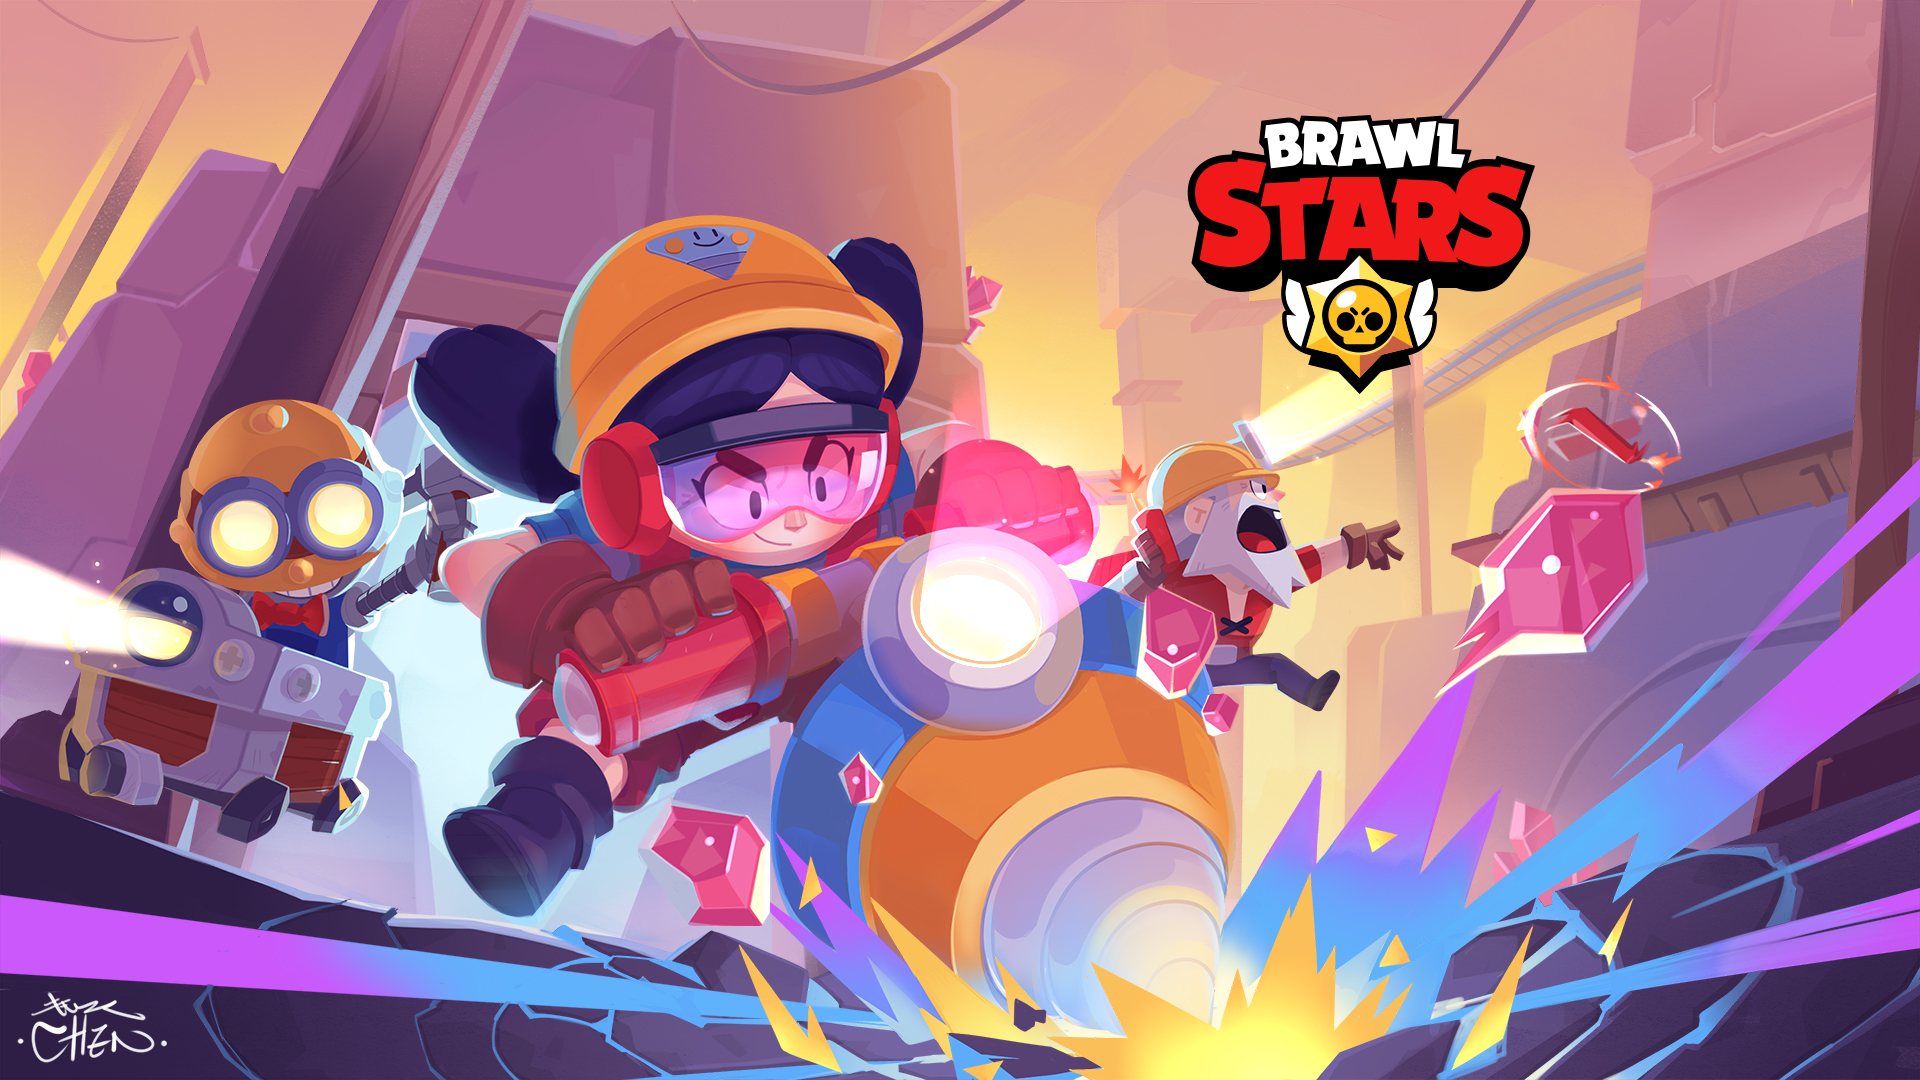 Brawl Stars On Twitter Here Are Some Wallpapers Of Your Favorite Miners - brawl stars epic art